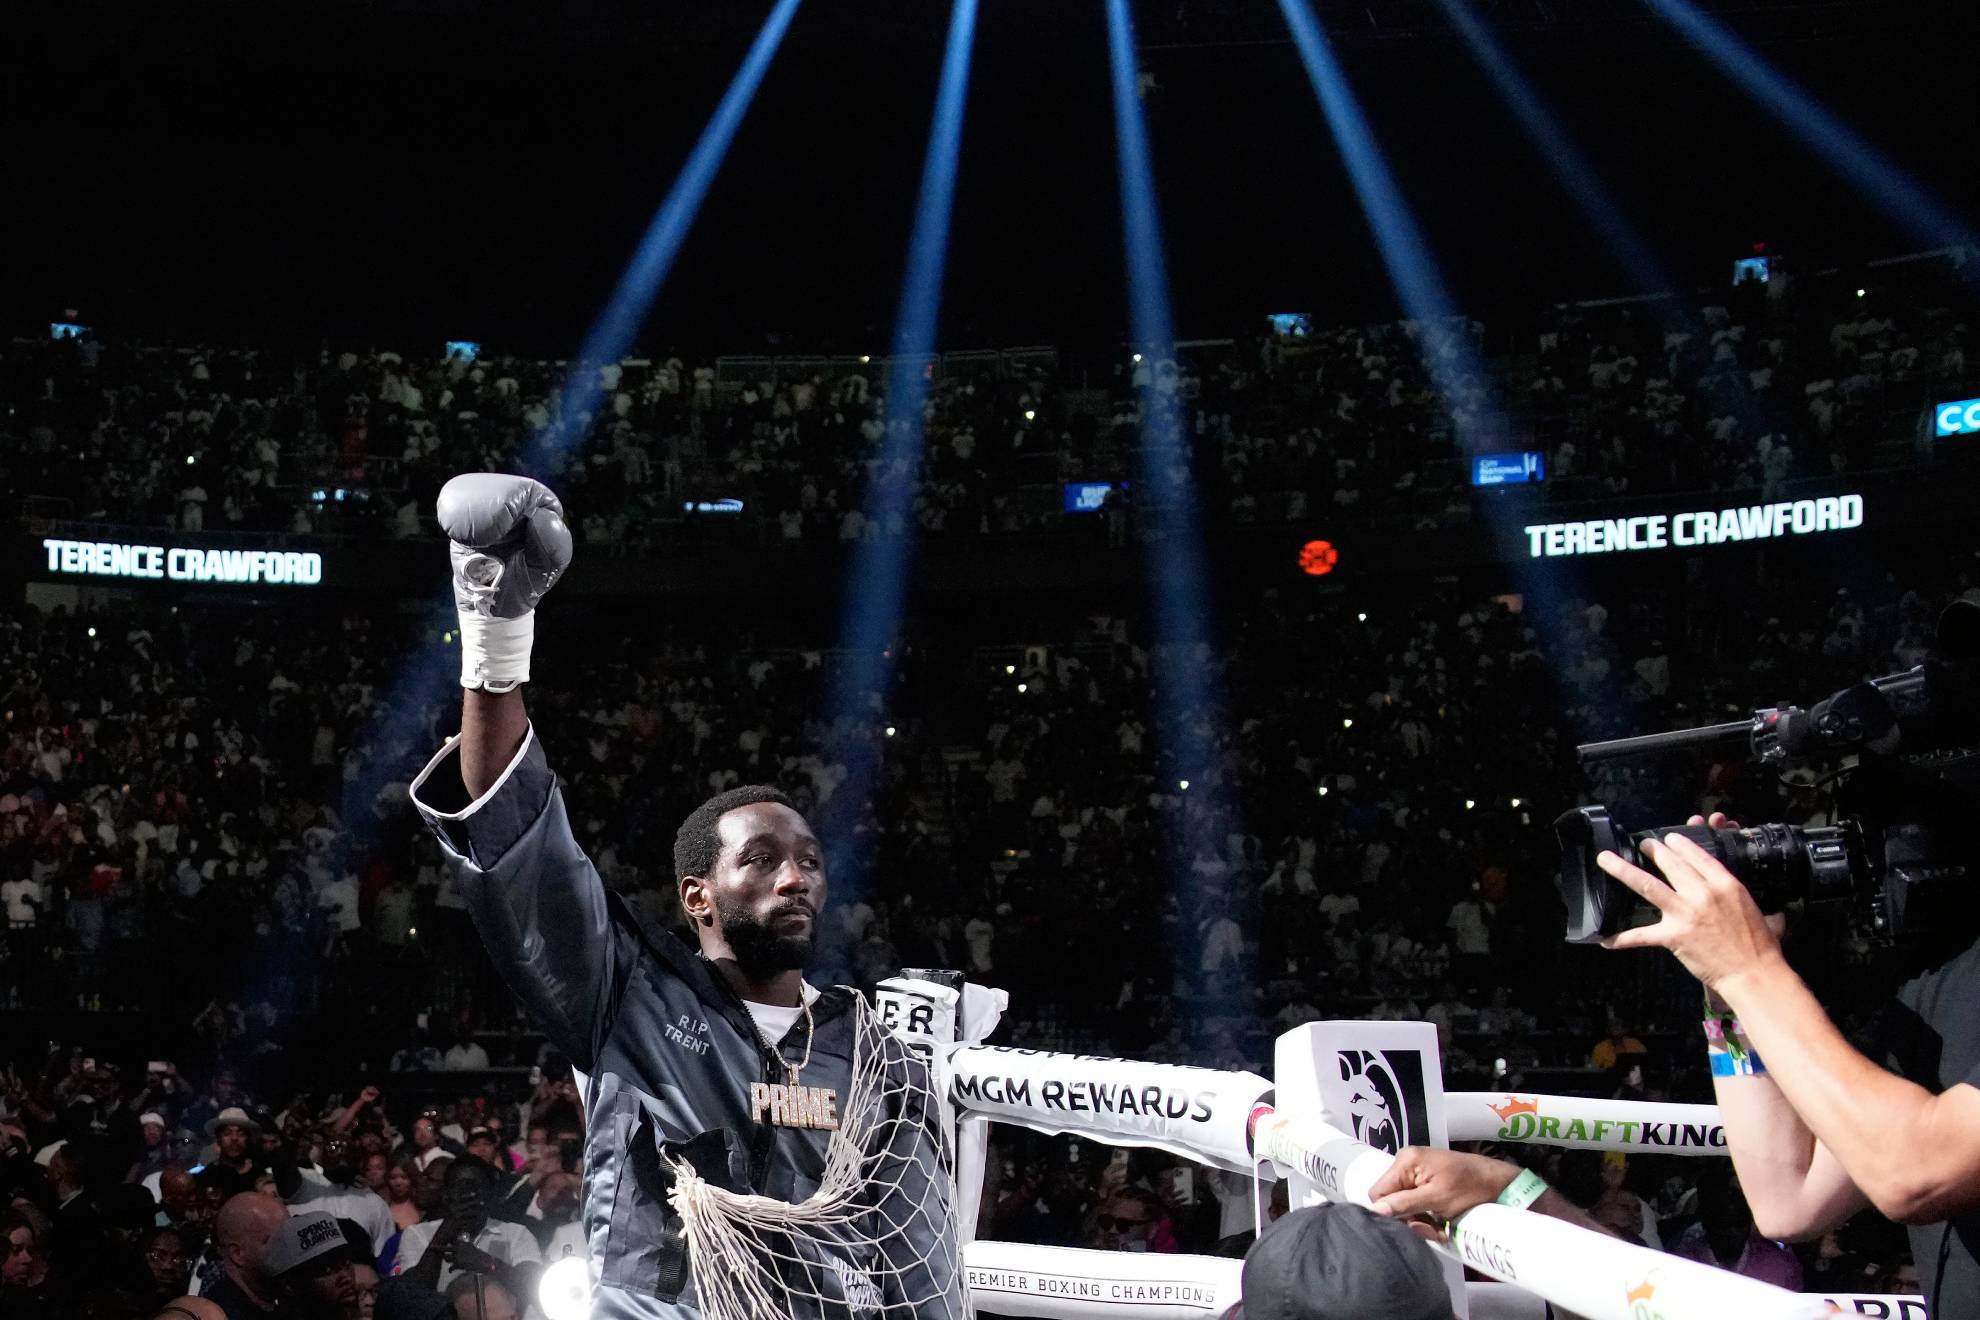 Terence Crawford enters the ring to fight Errol Spence Jr. /